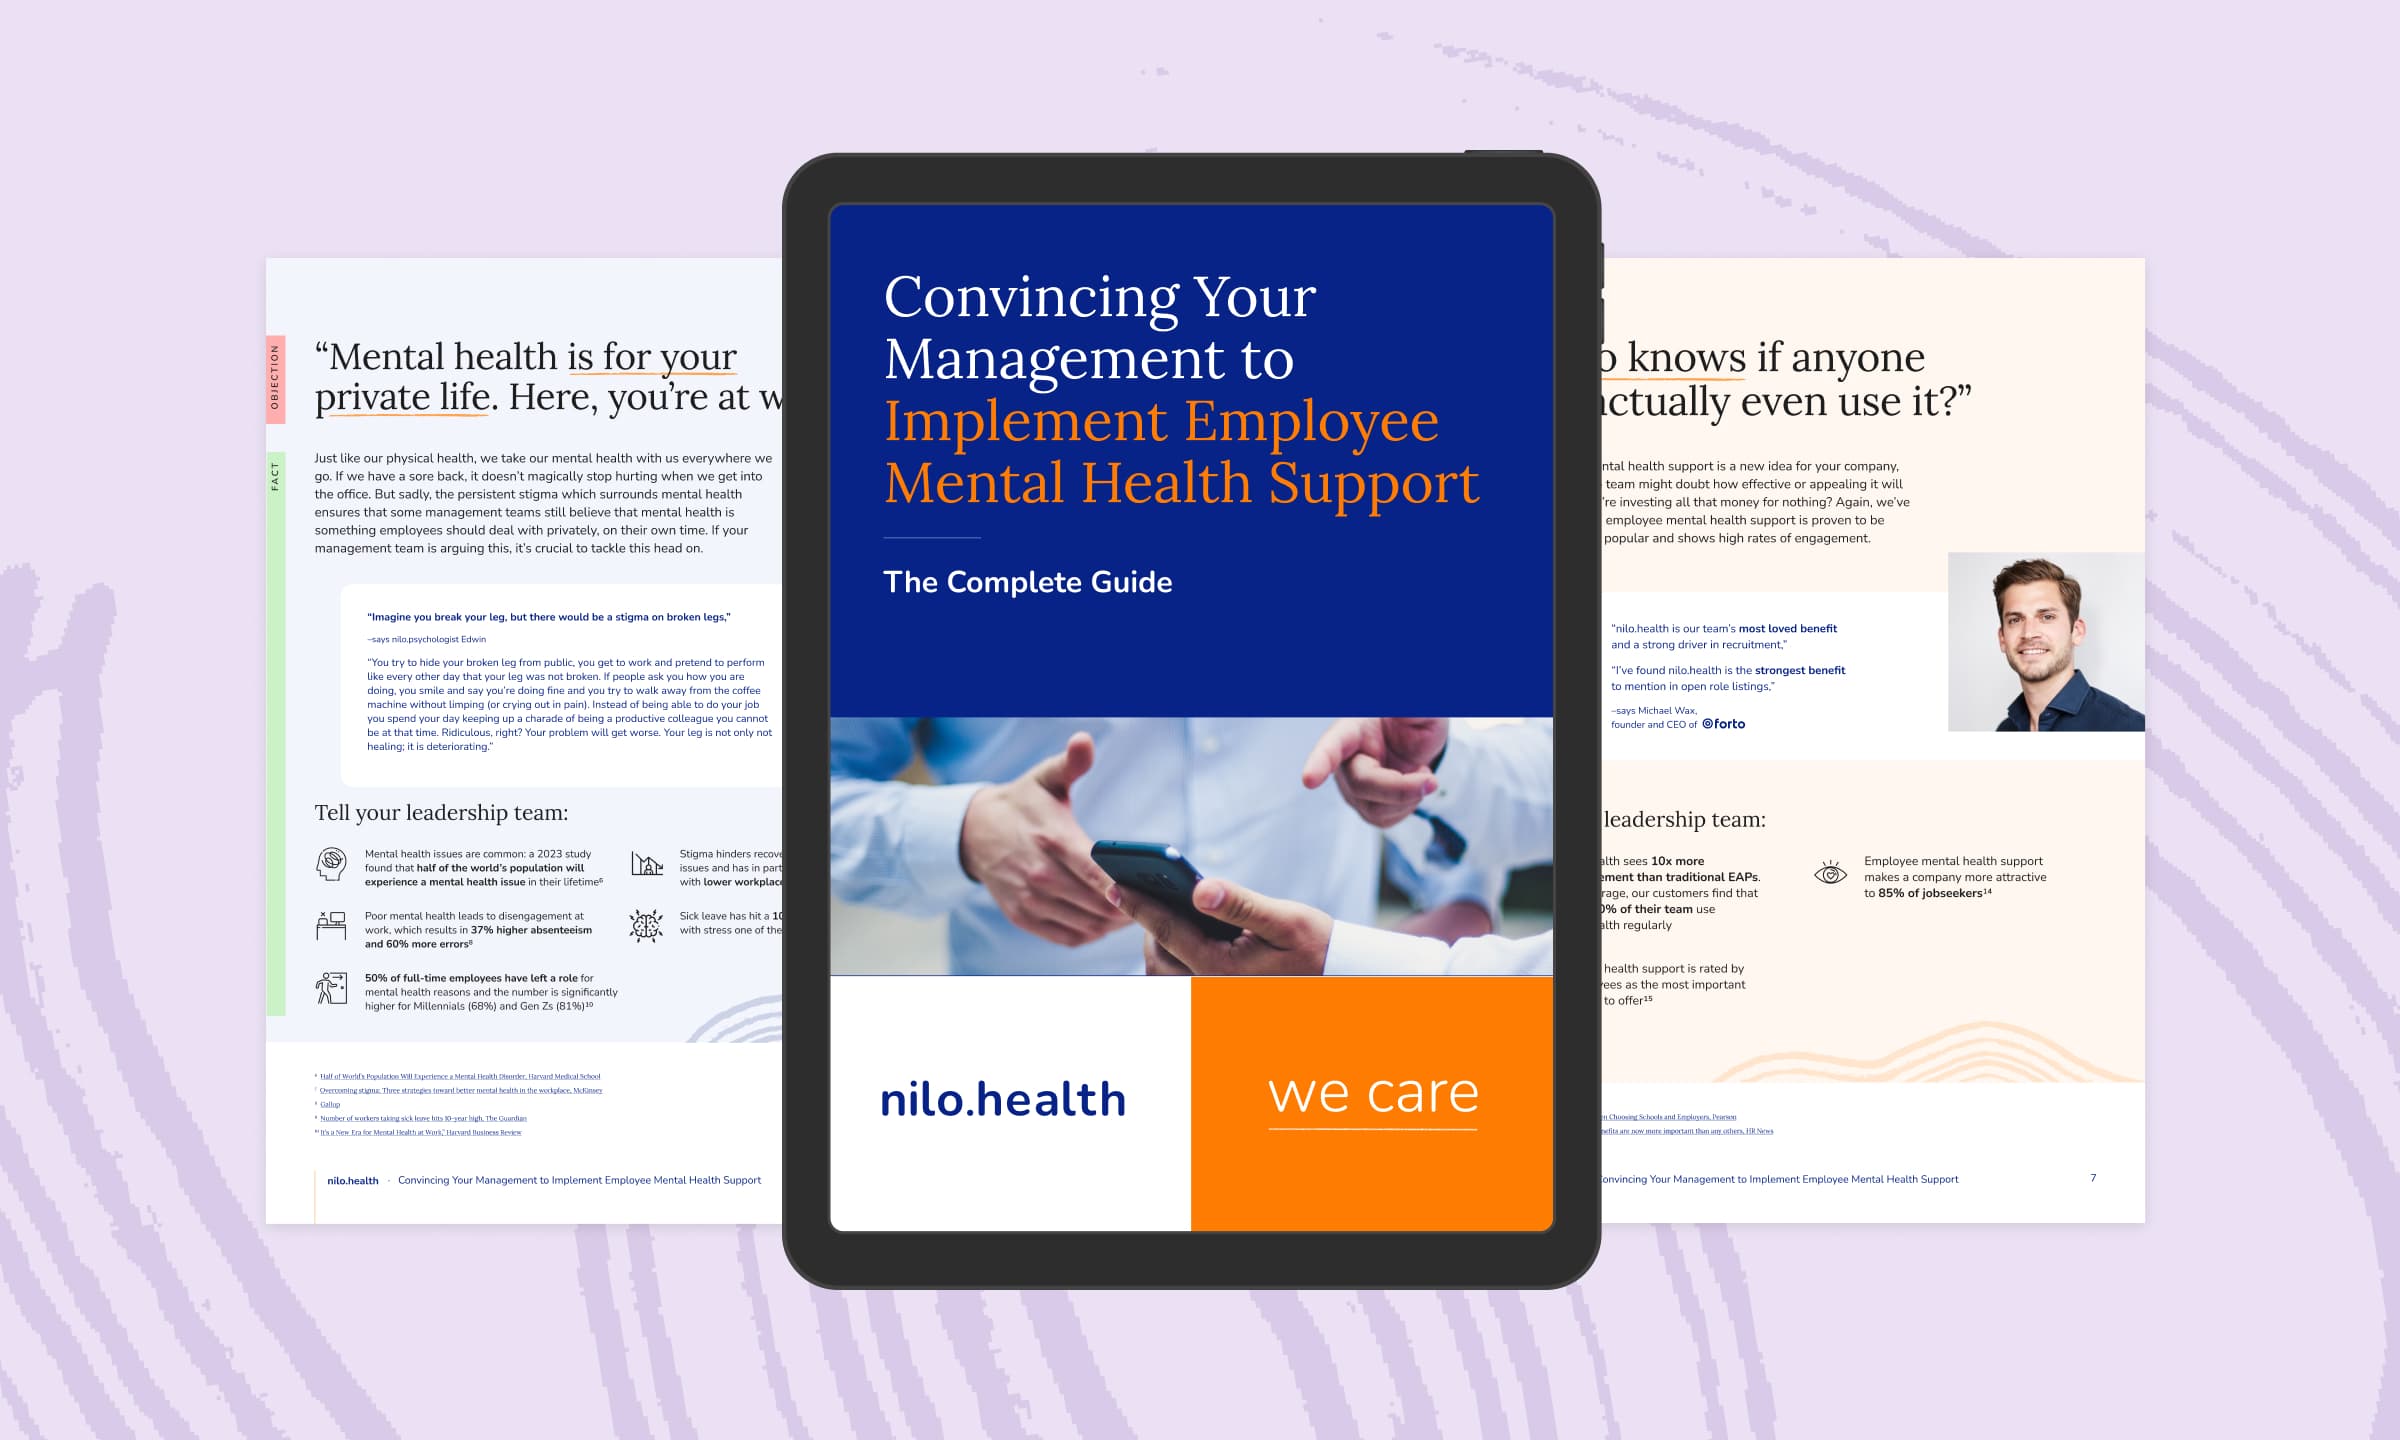 Convince your management of employee mental health support